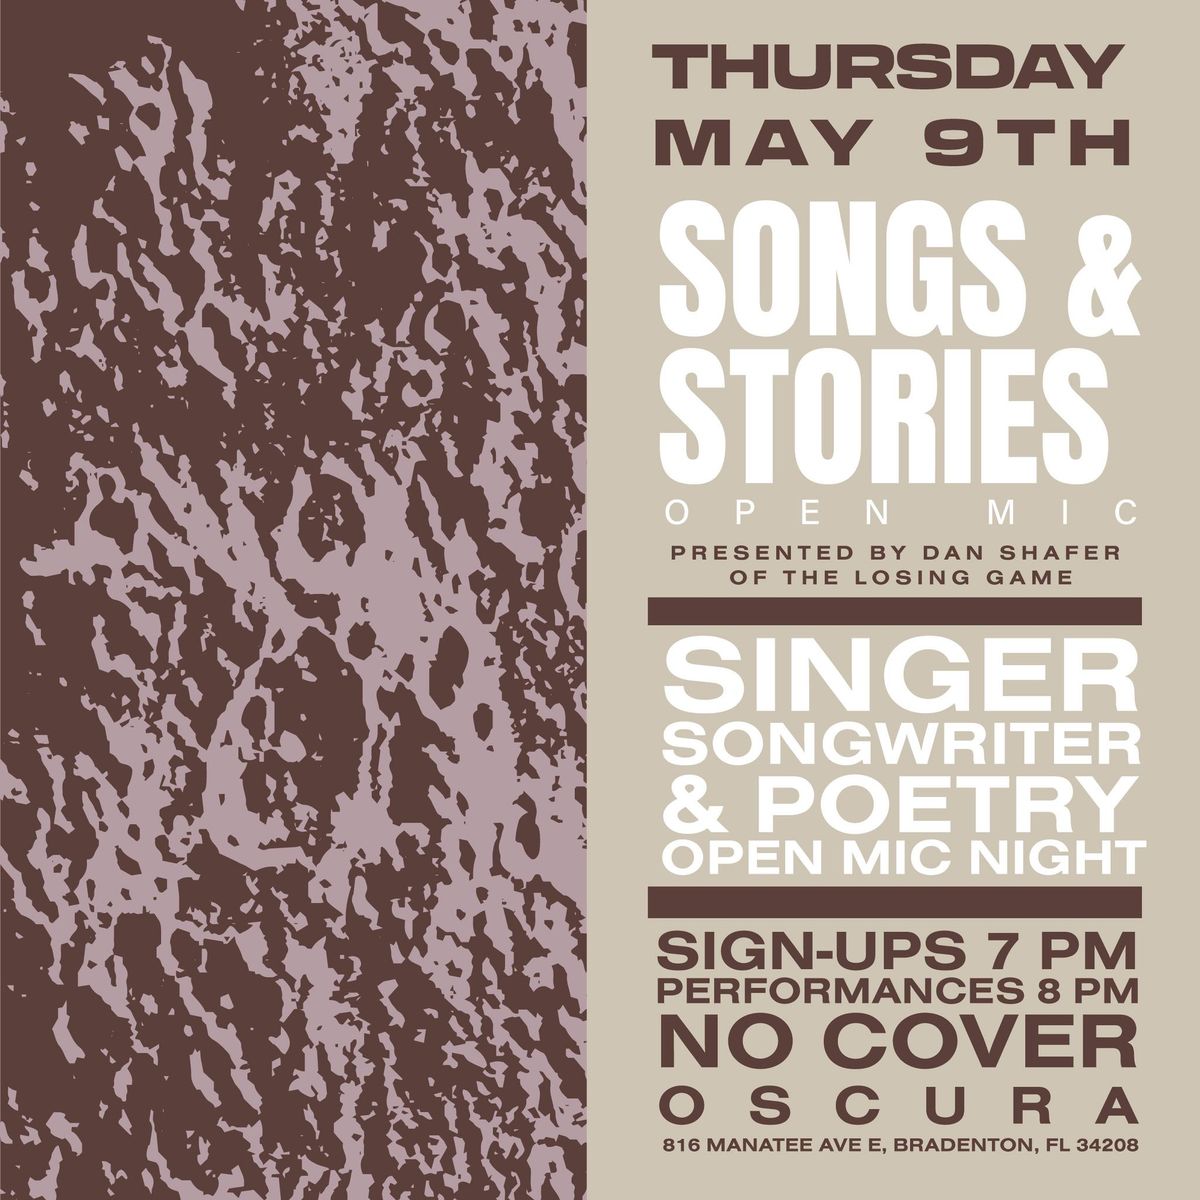 Songs & Stories - Open Mic @ Oscura